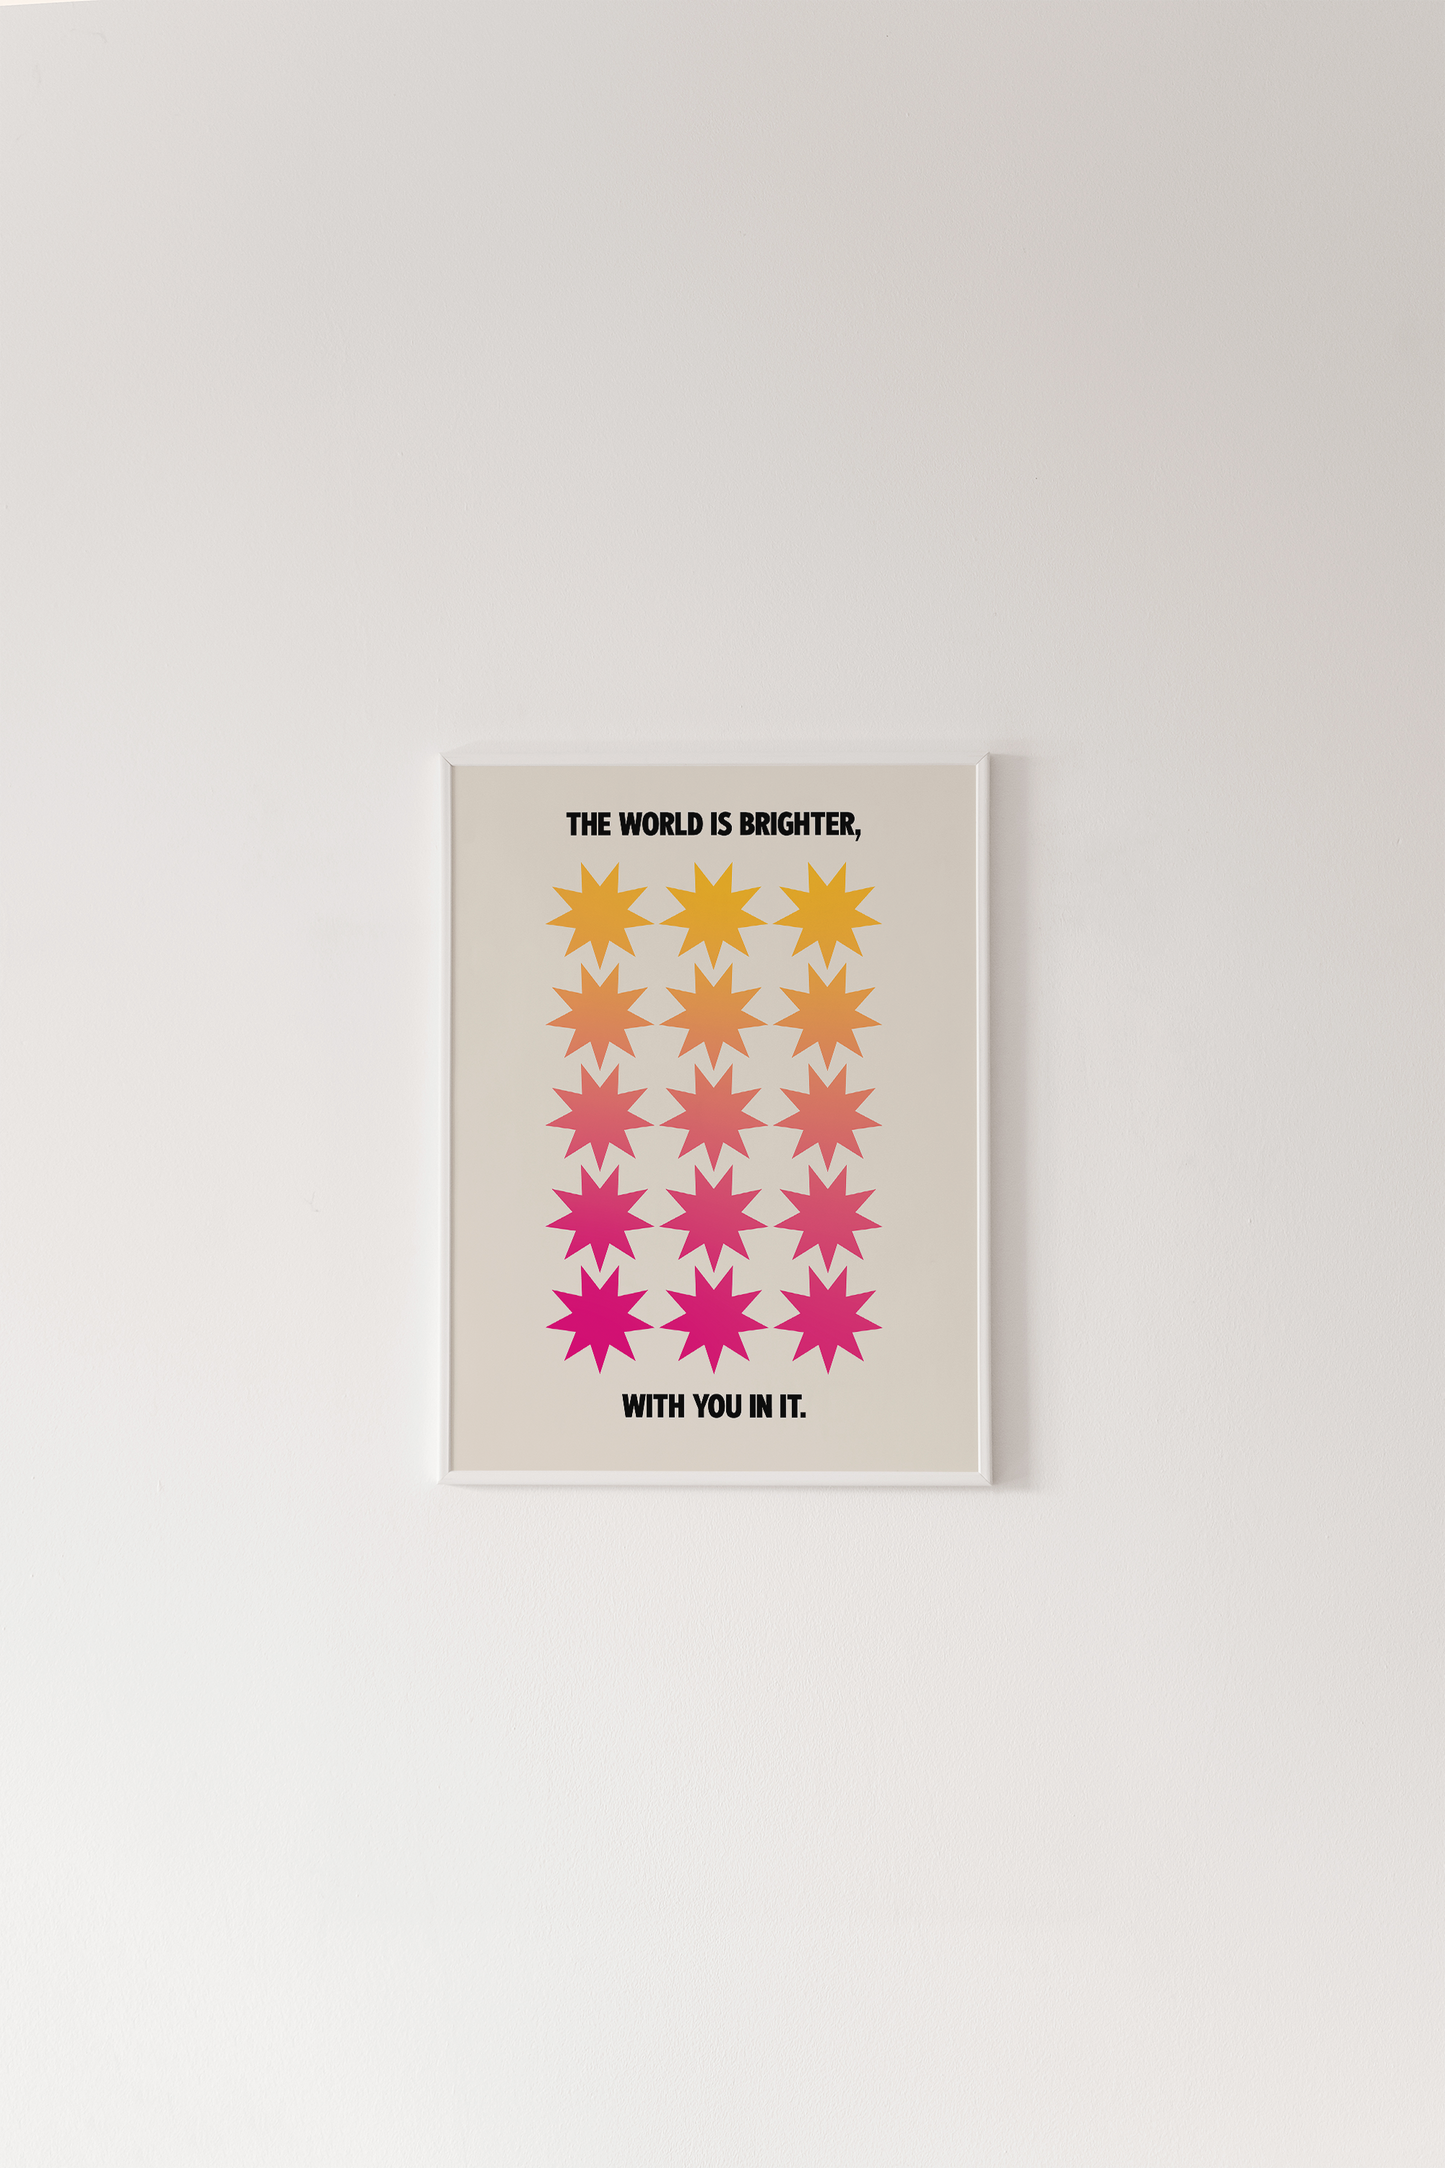 Special Price The World is Brighter Print